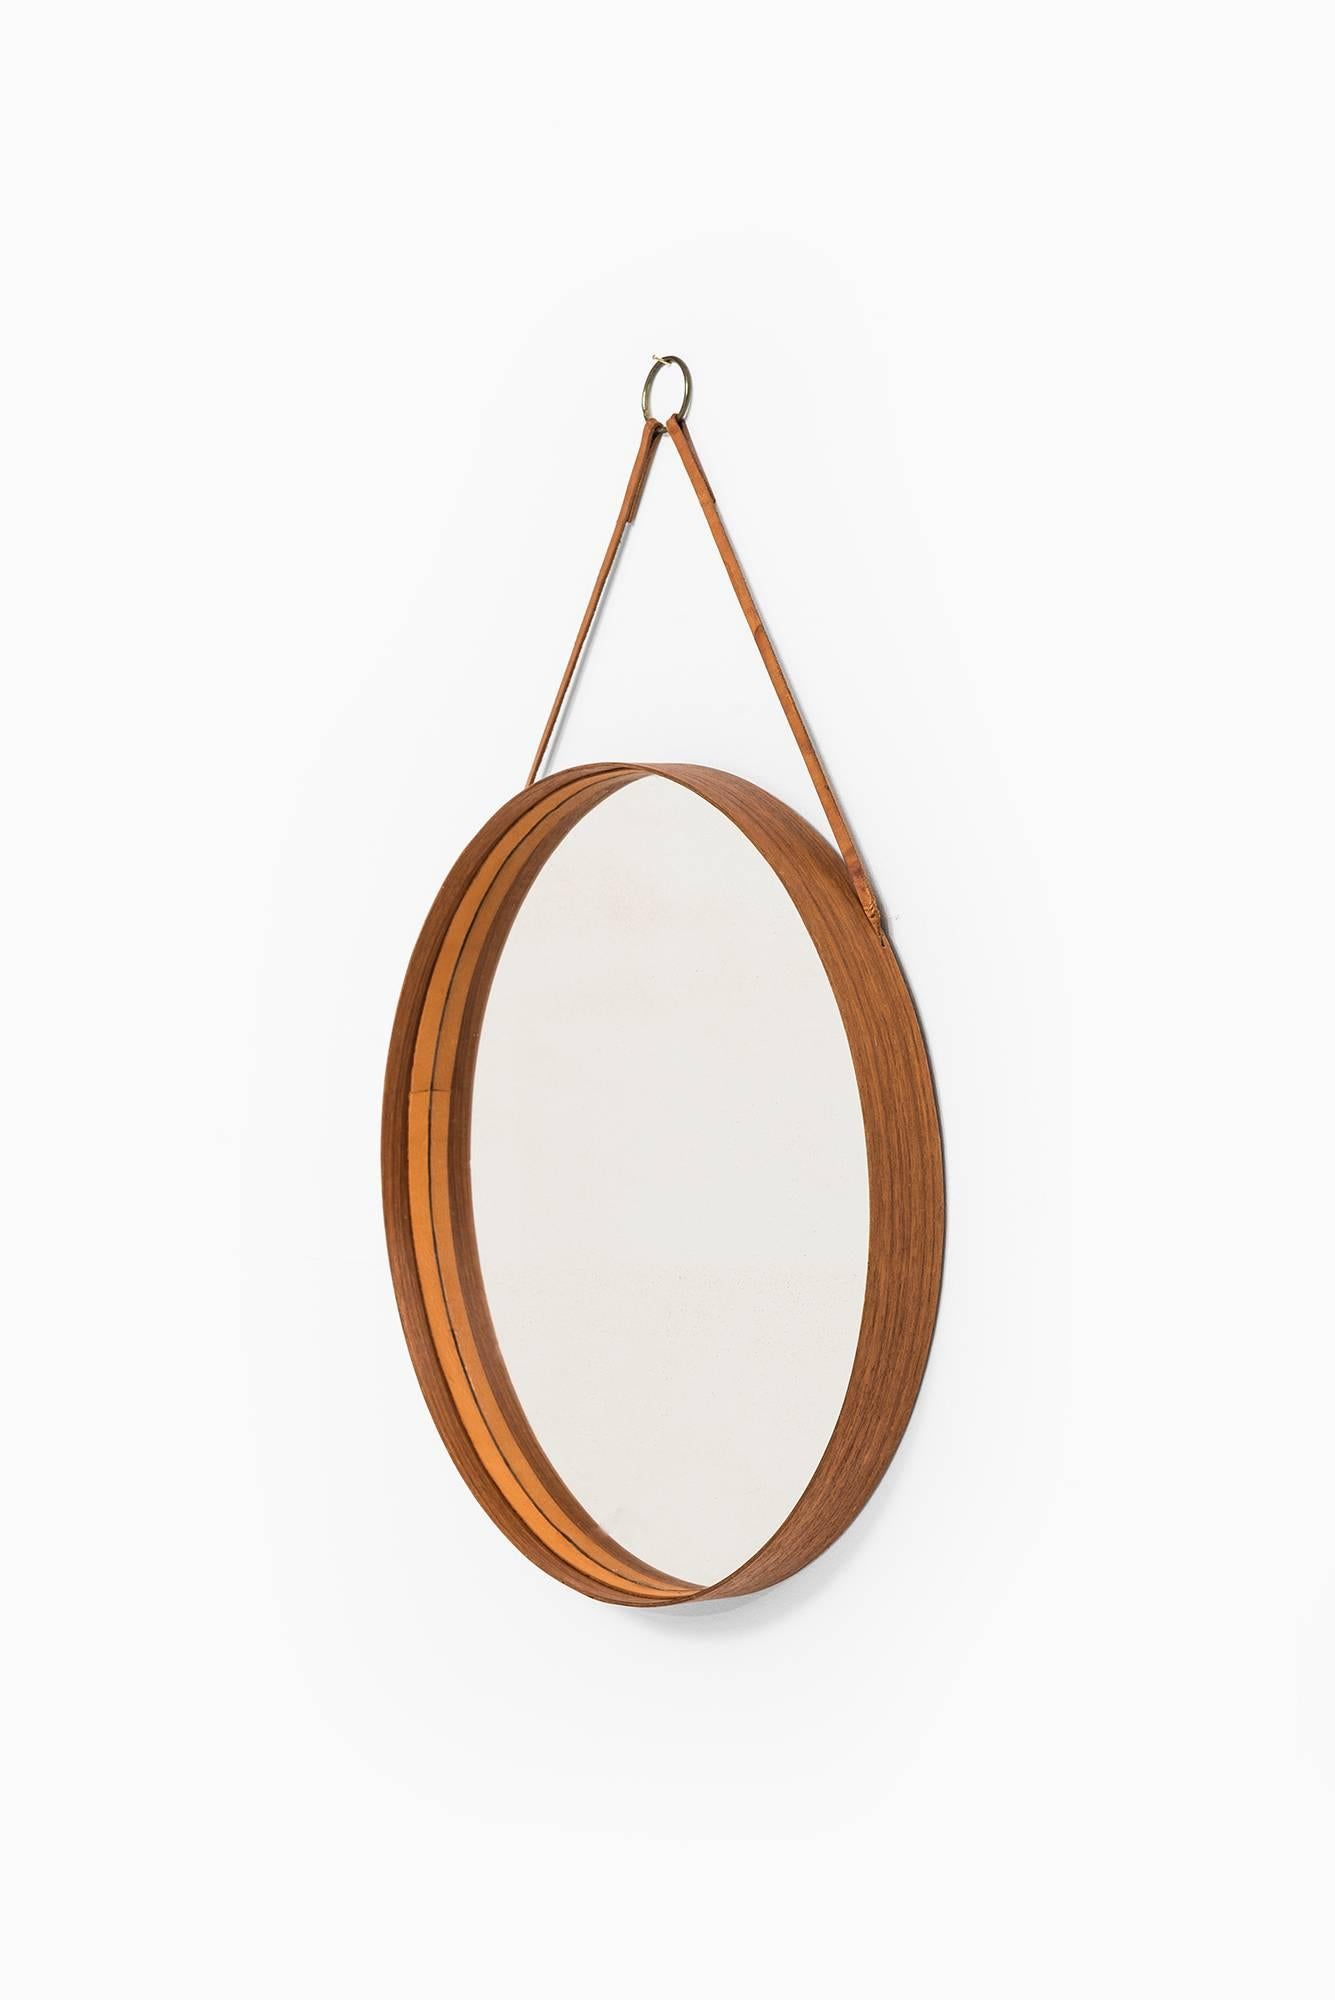 Rare mirror in teak, brass and leather. Produced by Glass mäster in Markaryd, Sweden.